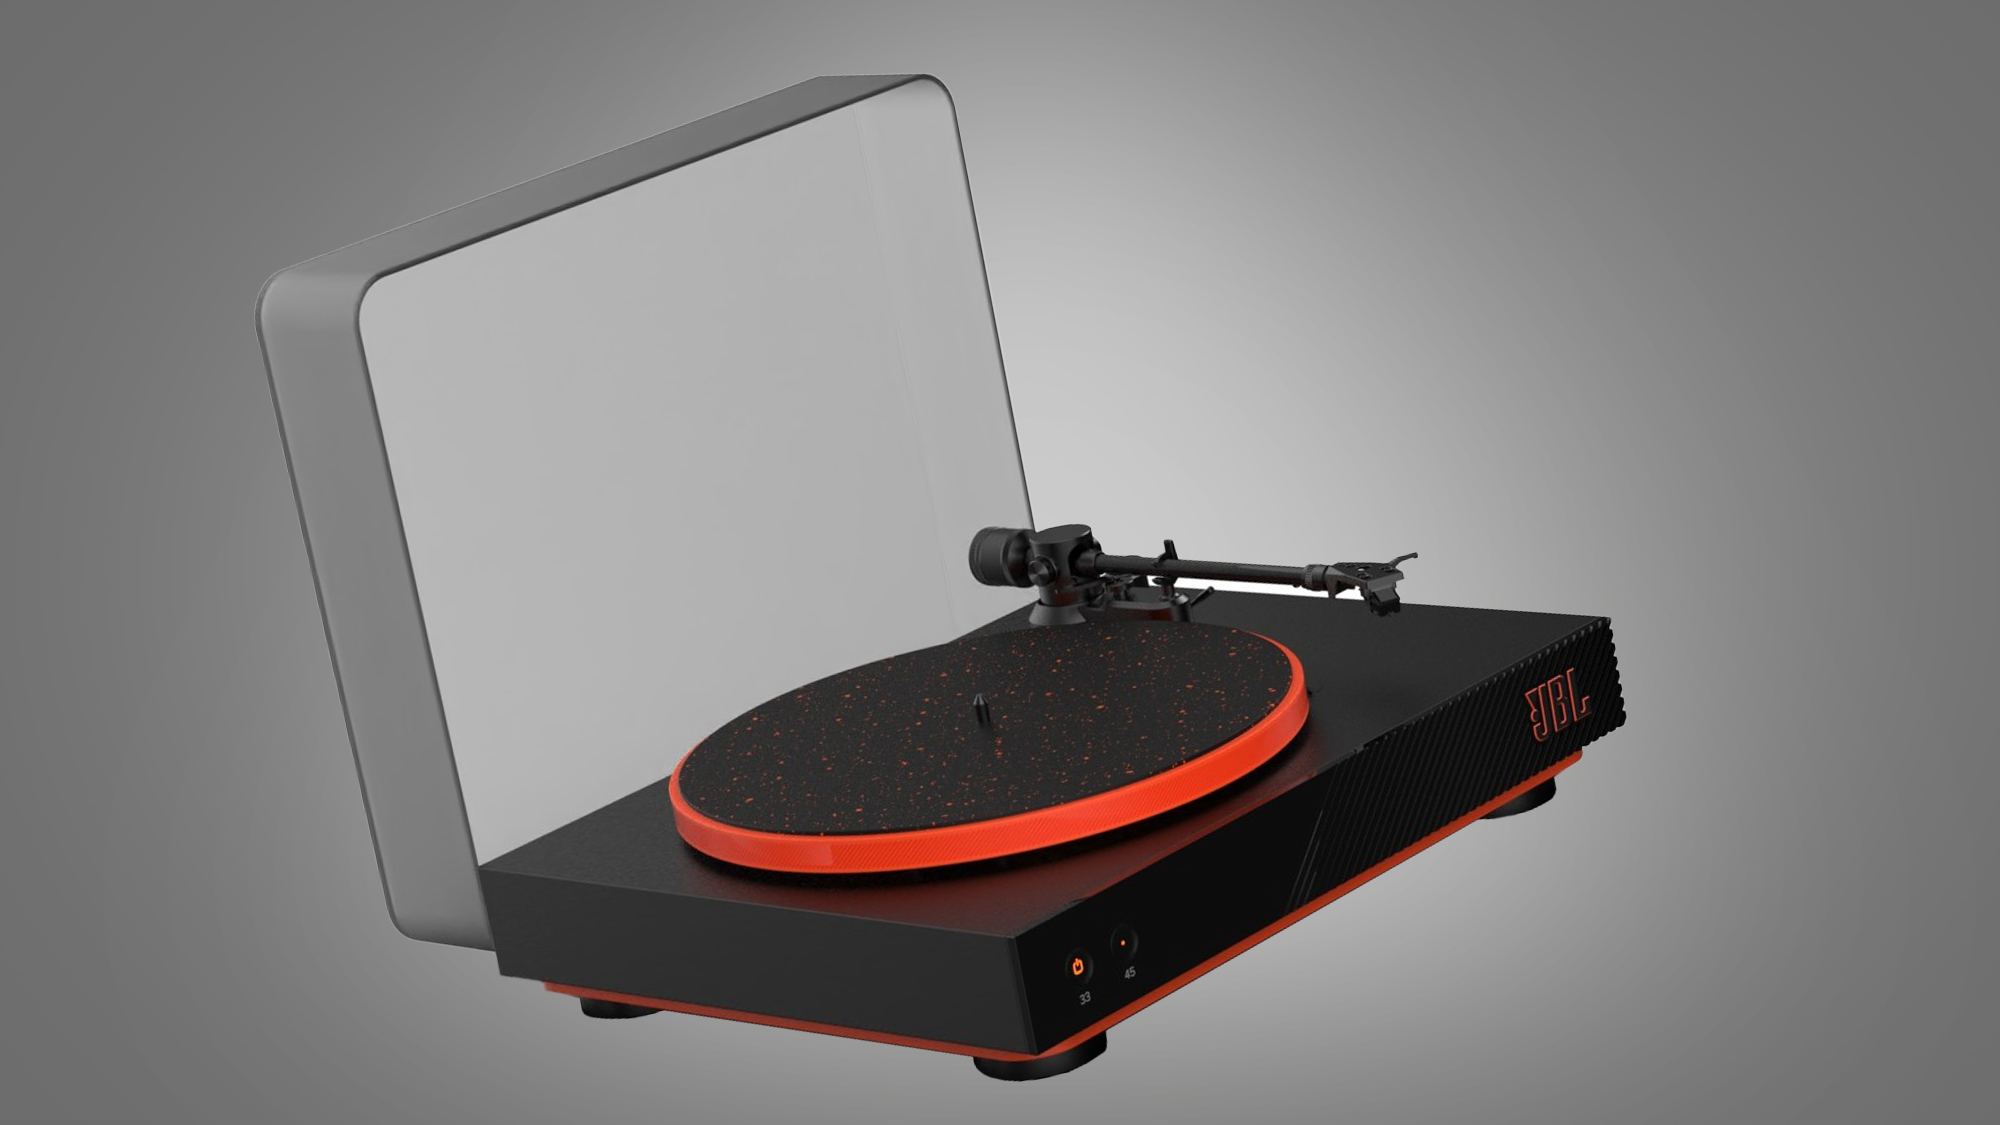 The JBL Spinner BT turntable on a gray background